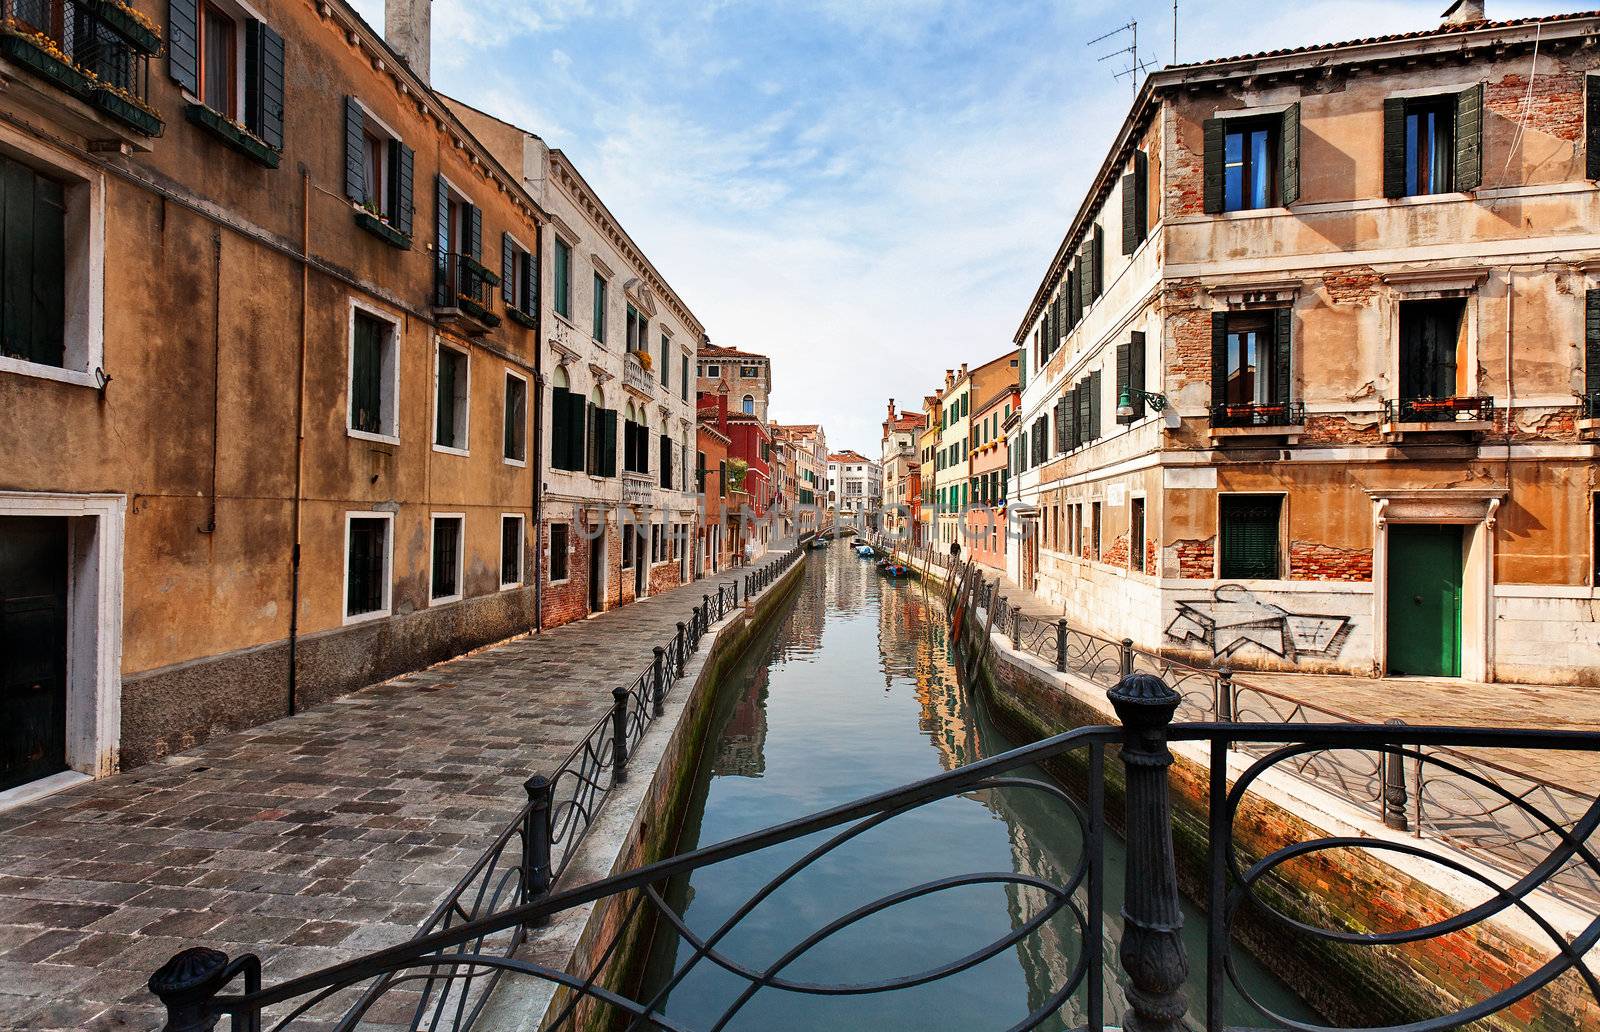 Venice. Venetian canal. Venice is a city in northeast Italy which is renowned for the beauty of its setting, its architecture and its artworks. It is the capital of the Veneto region.